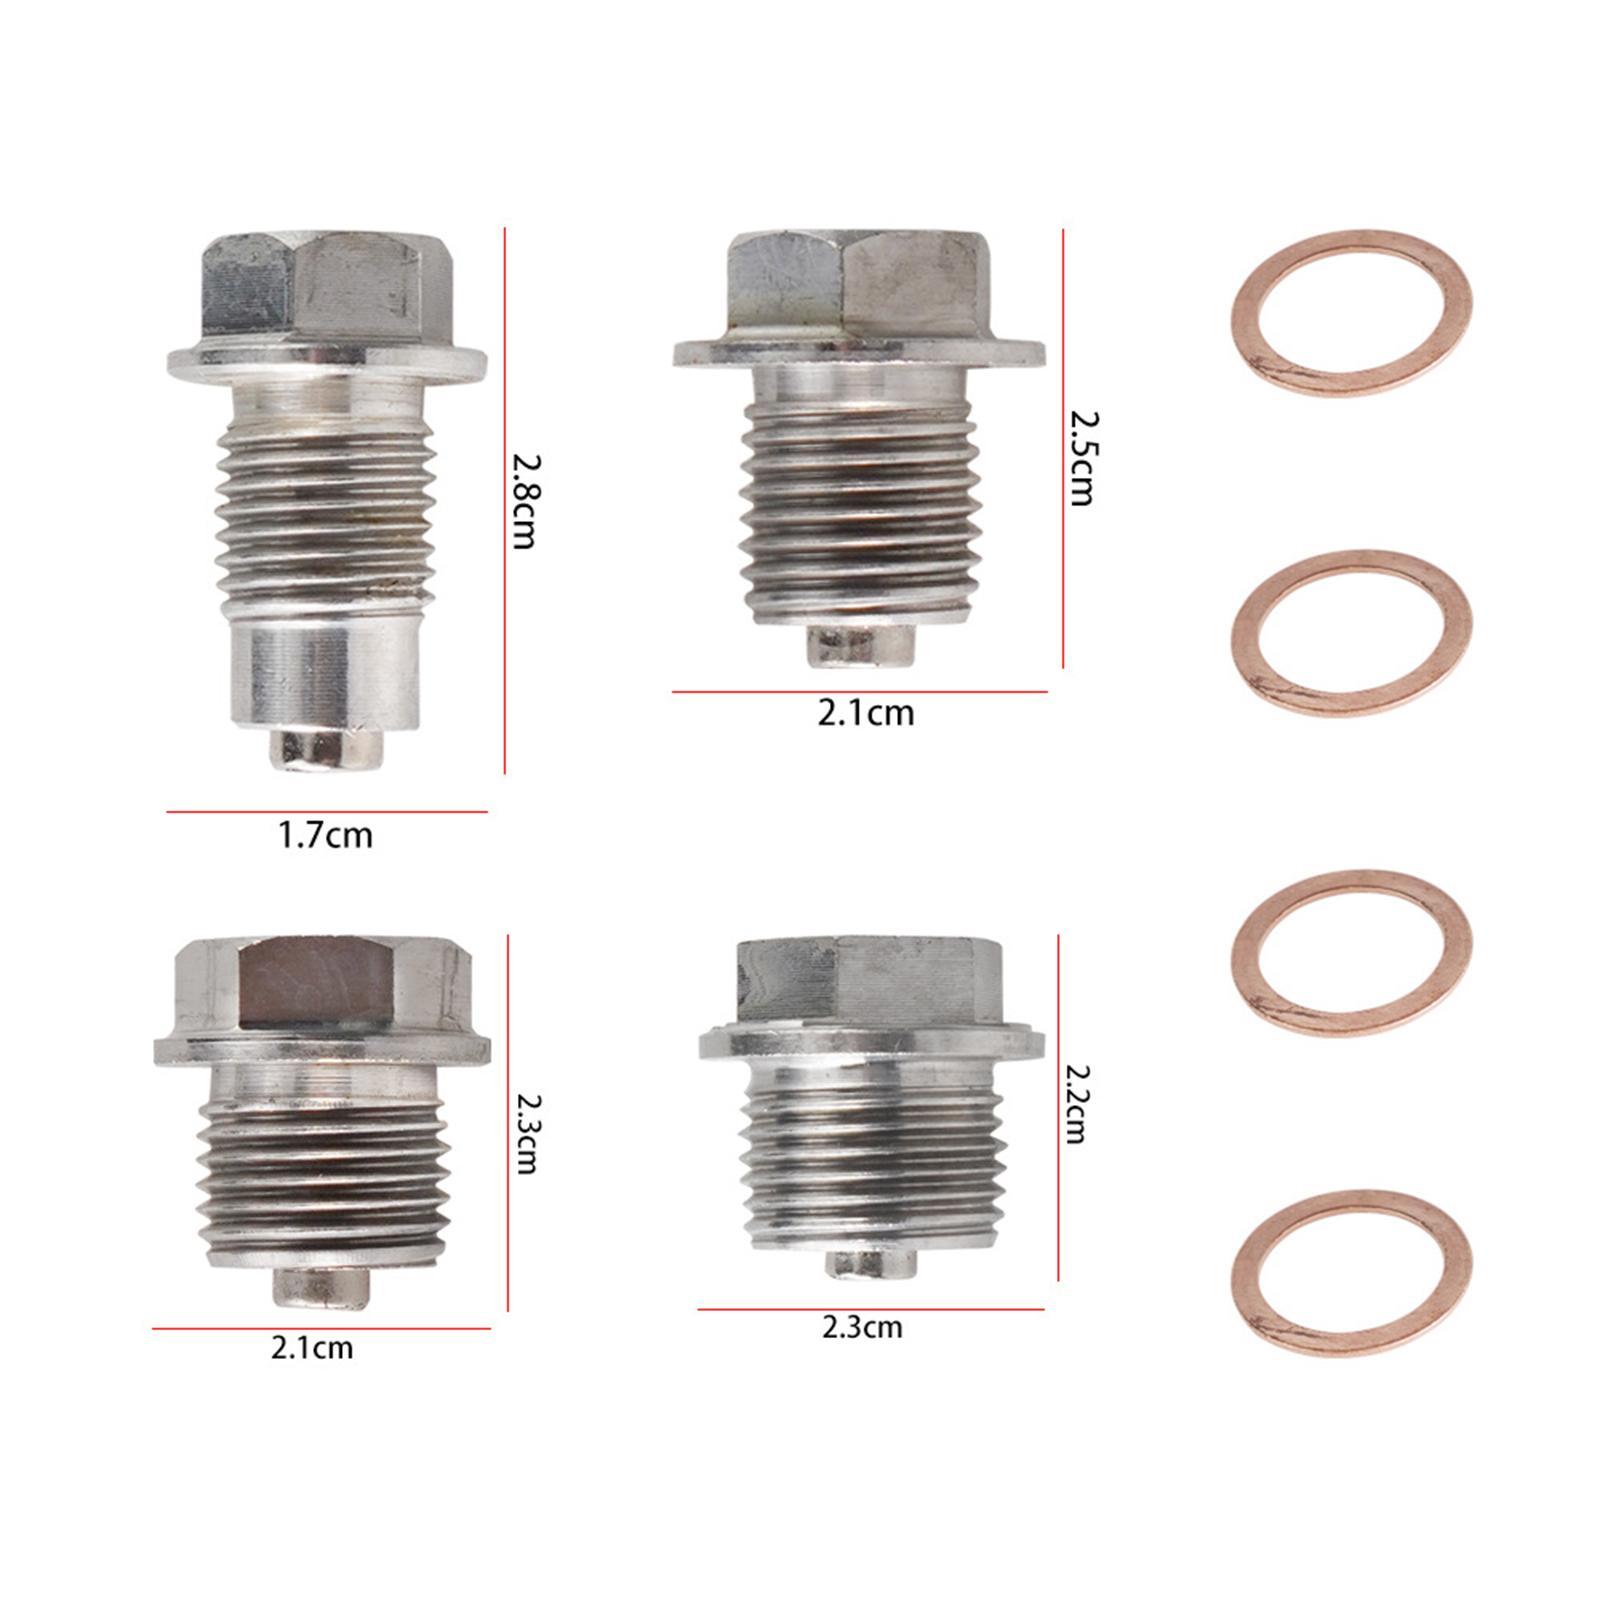 Oil Drain Plug Bolt Screw Accessories Durable for Most Cars